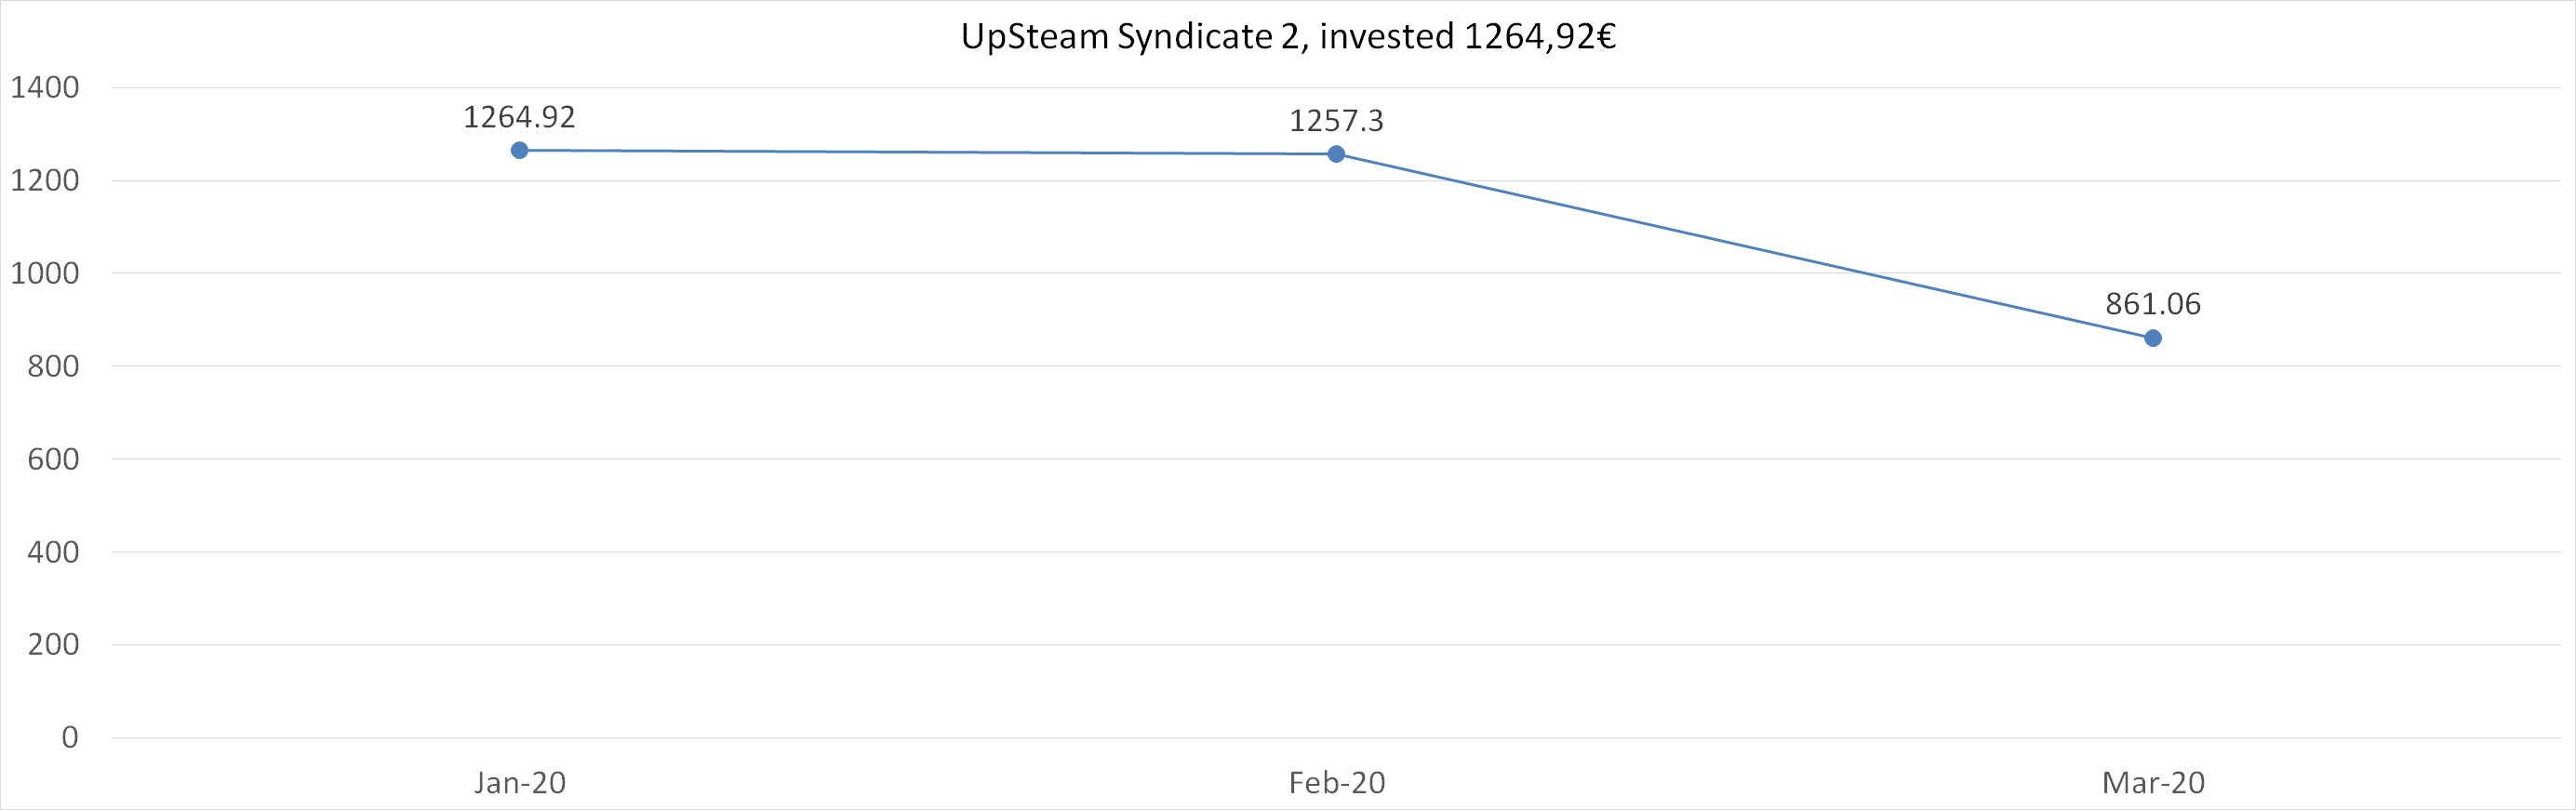 UpSteam syndicate 2, invested 1264,92 euros in march 2020